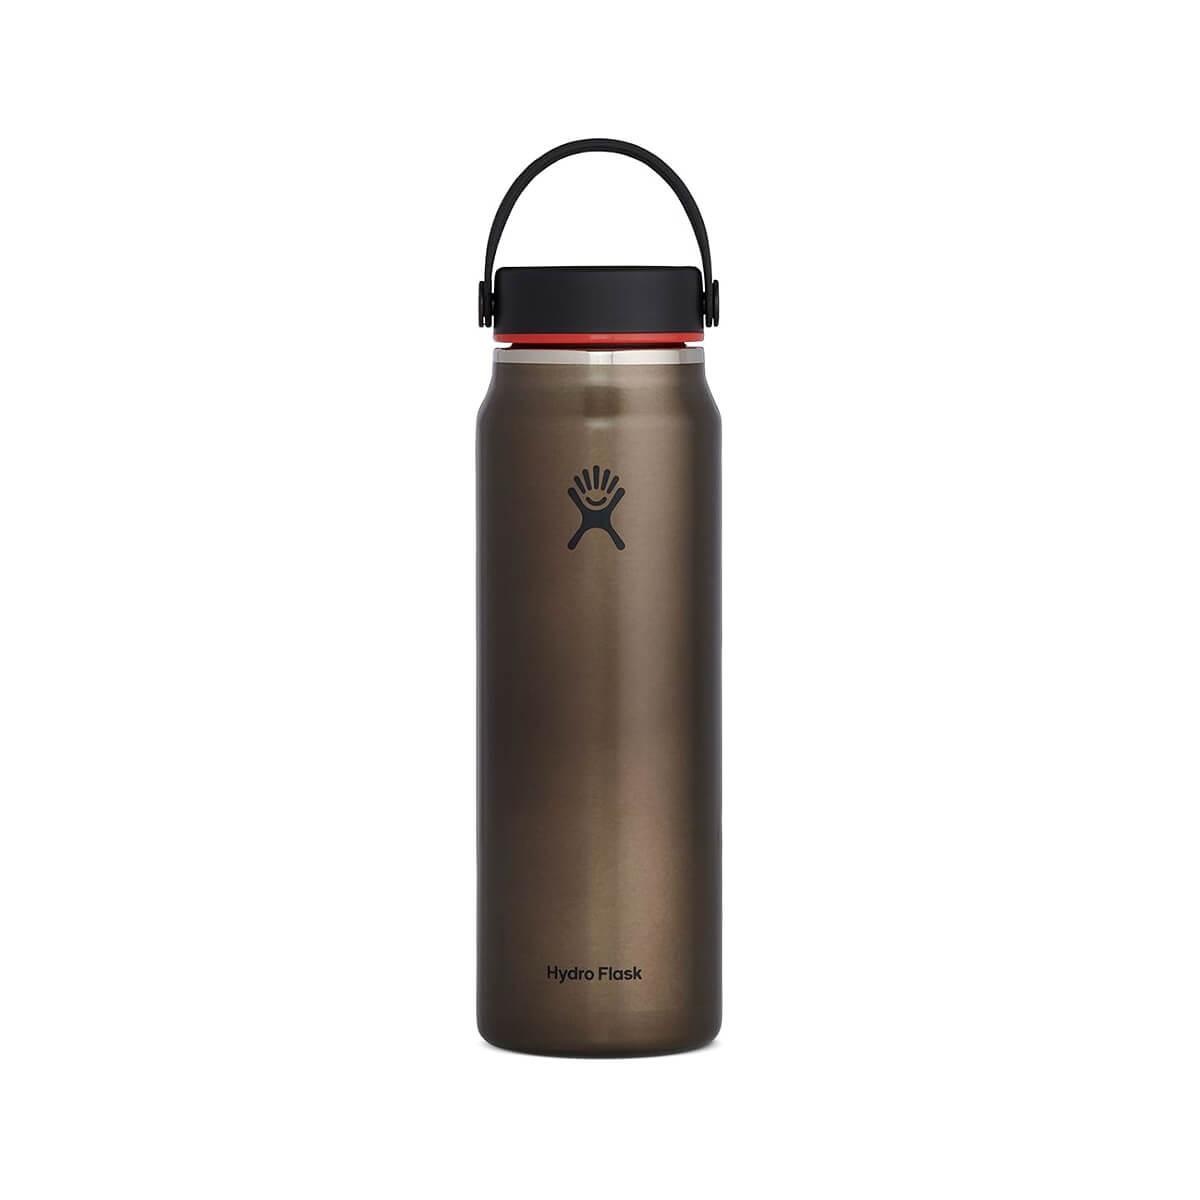 Stanley Stainless Steel Water Bottle- 32 oz Hike and Camp